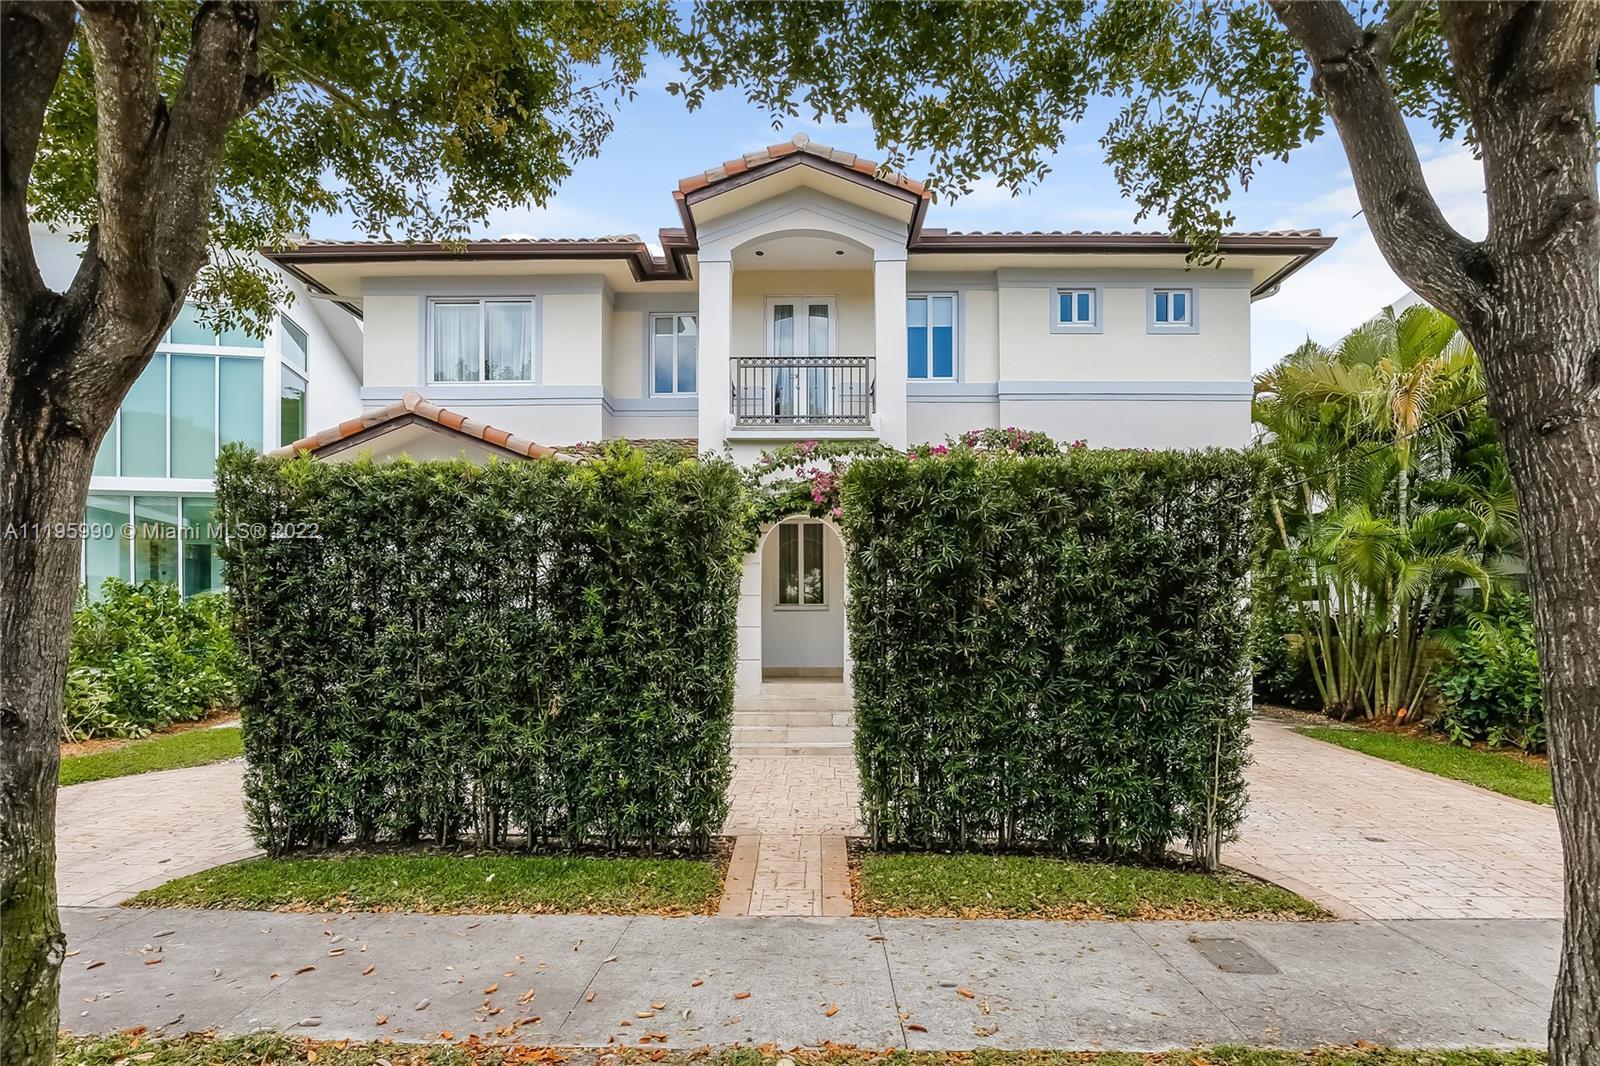 Built in 2008 this mediterranean style home is located in the prestigious and sought-after N Bay Rd.